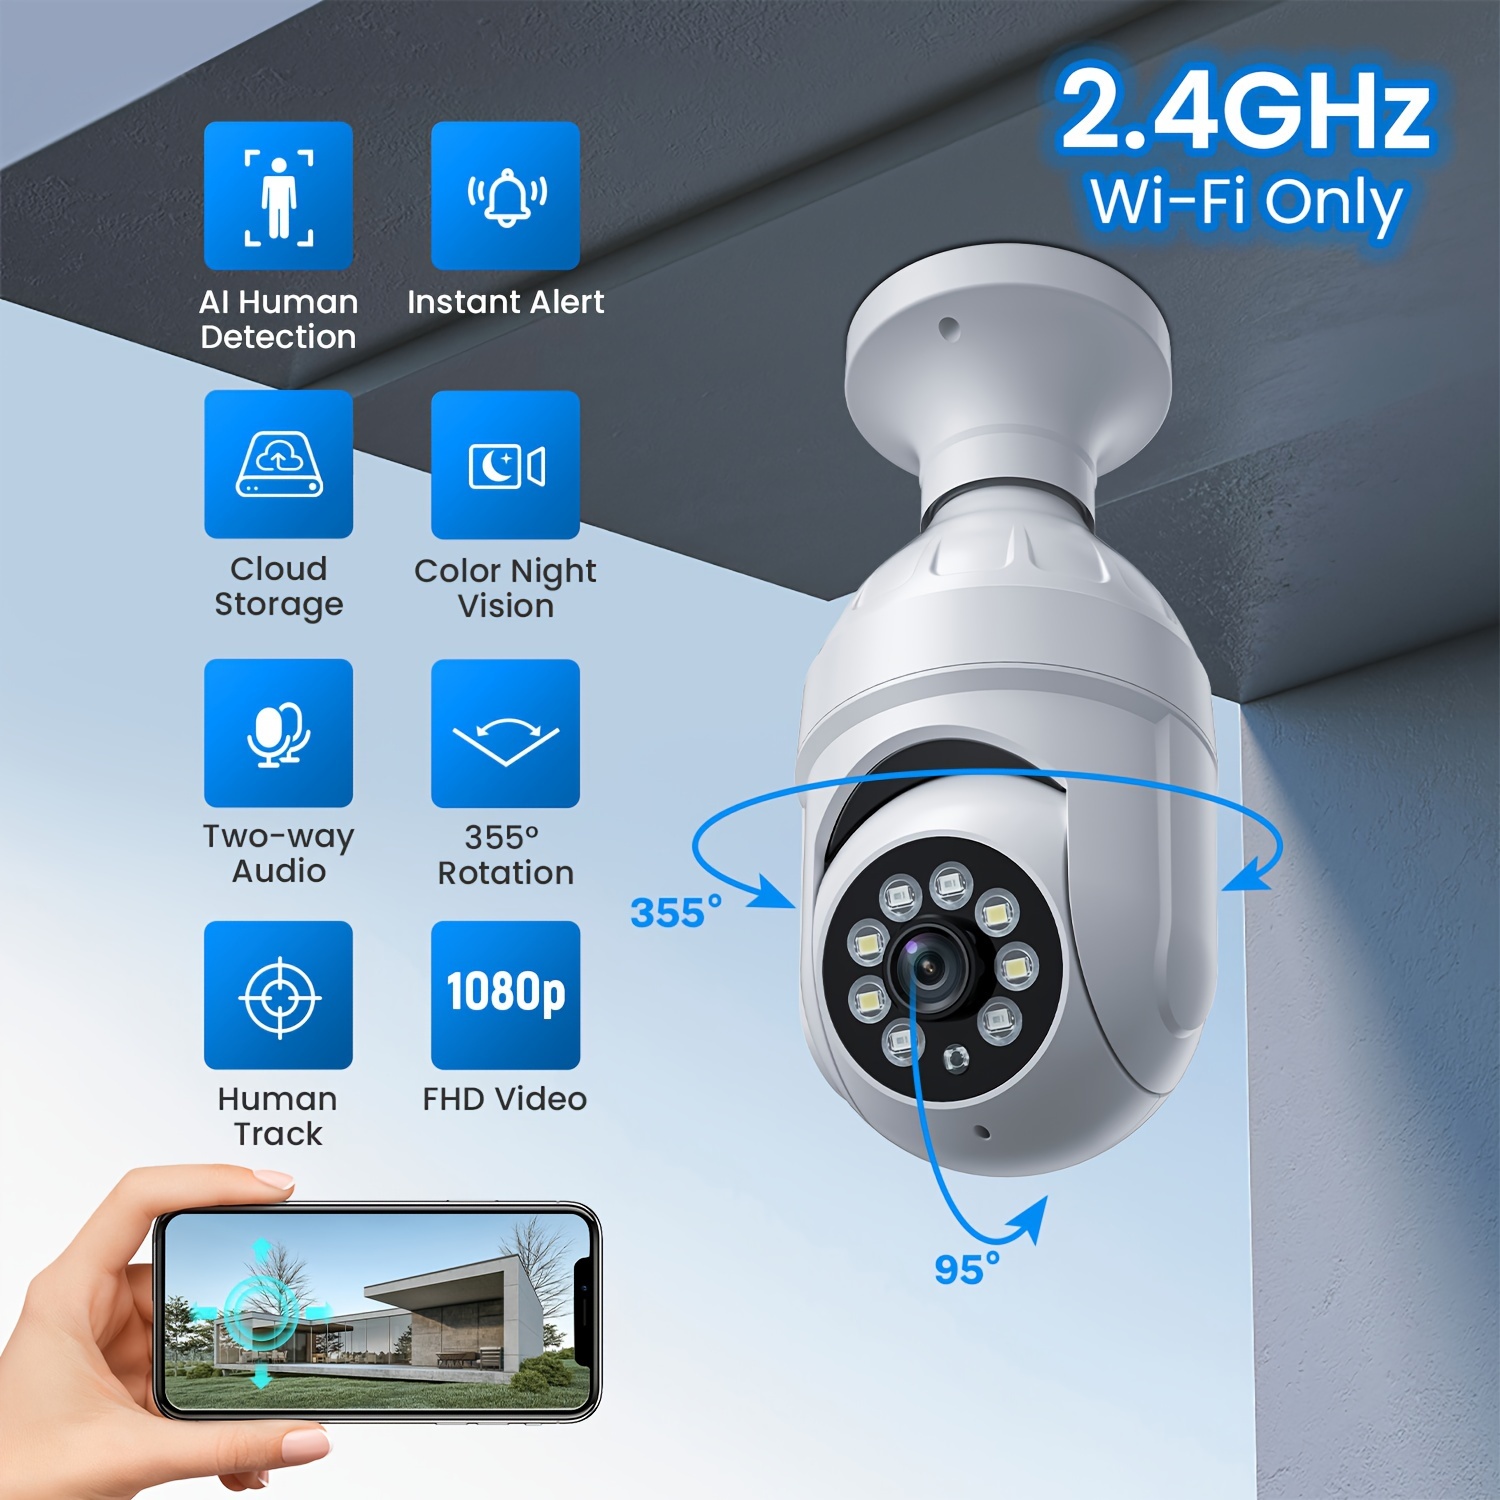 1080p Light Bulb Wireless Security Camera, 355° Panoramic Dome Cam, Live  View, AI Human Detection, 2-Way Audio, Color Night Vision, Cloud Storage,  Spo